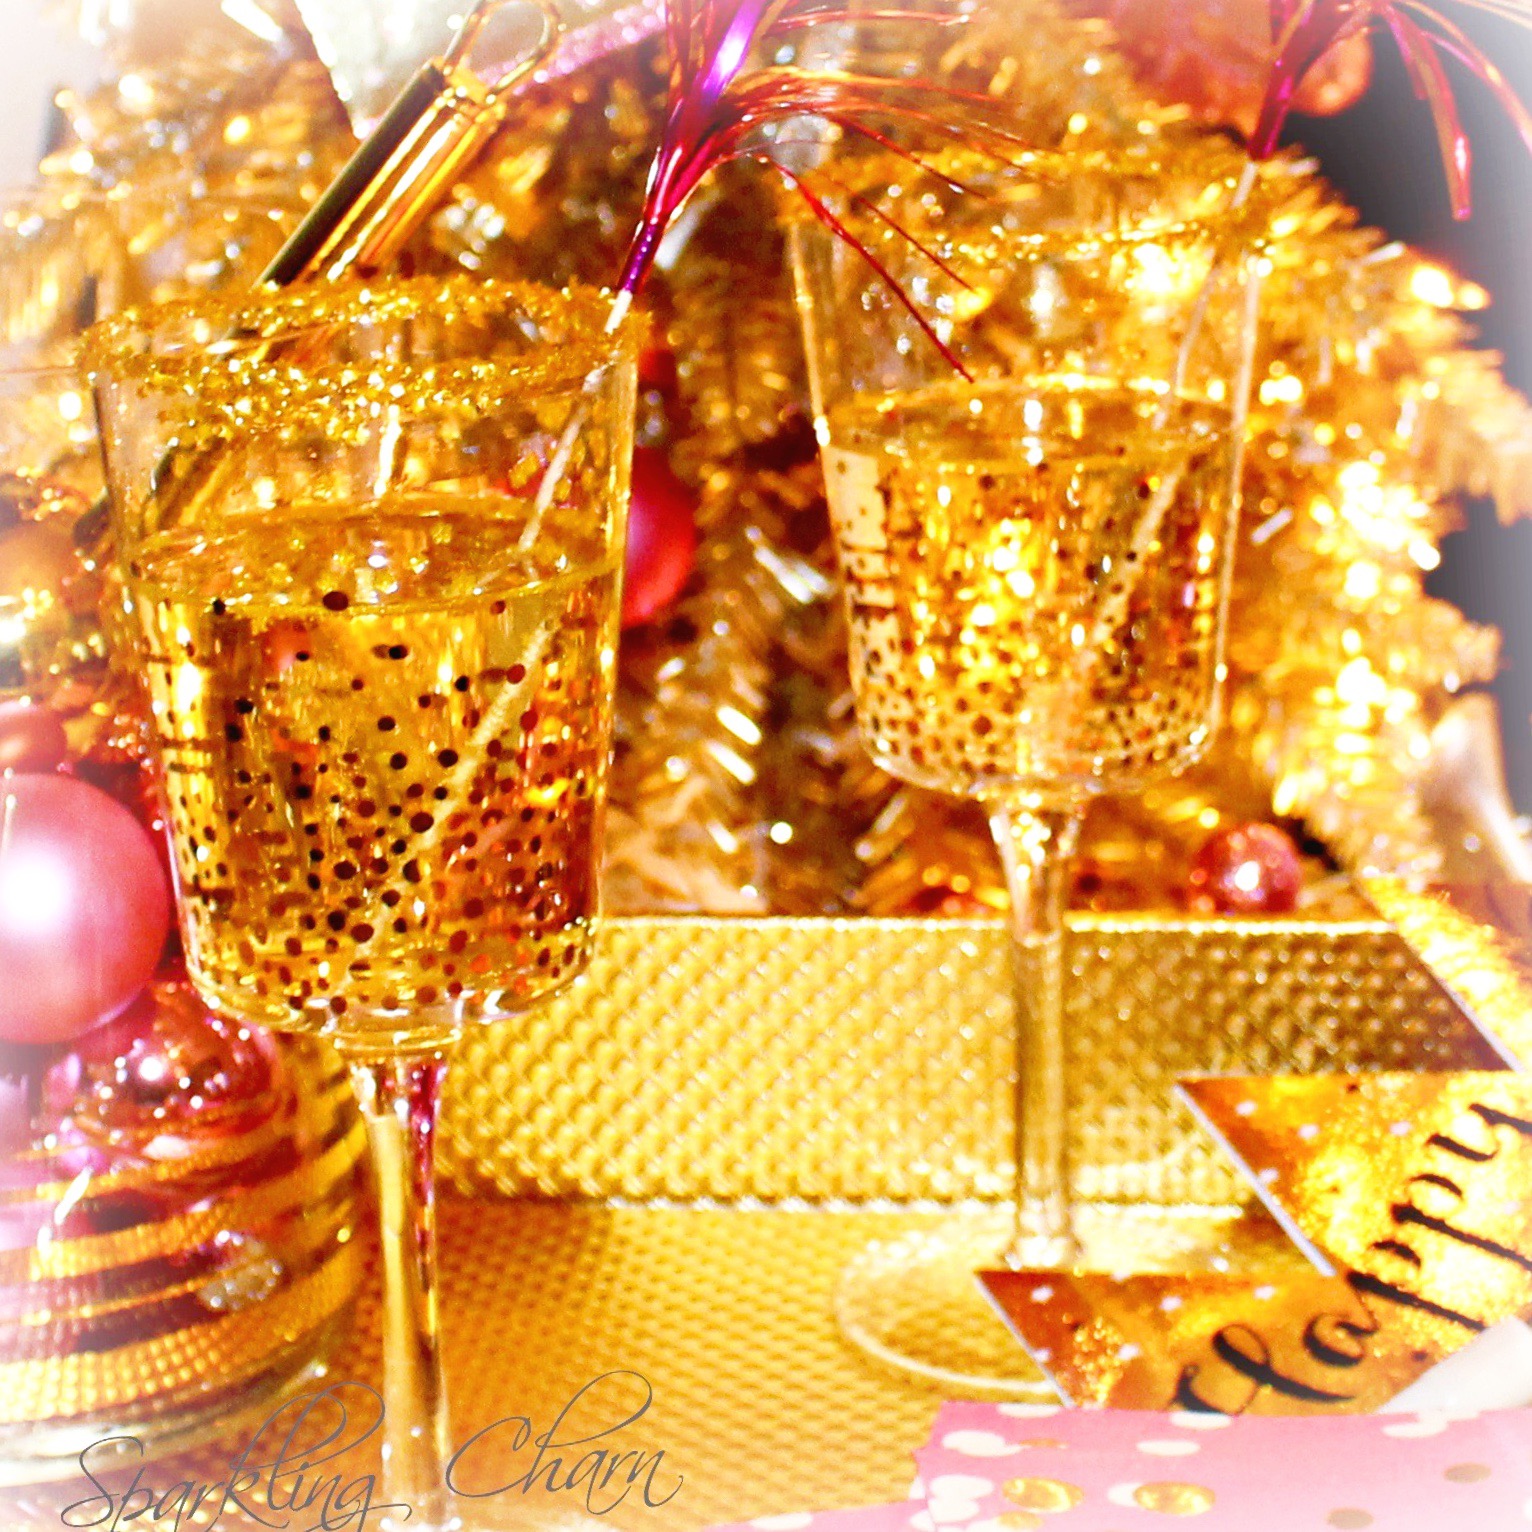 New Year’s Eve Sparkle and Sip! A Fancy Way To Rim a Glass